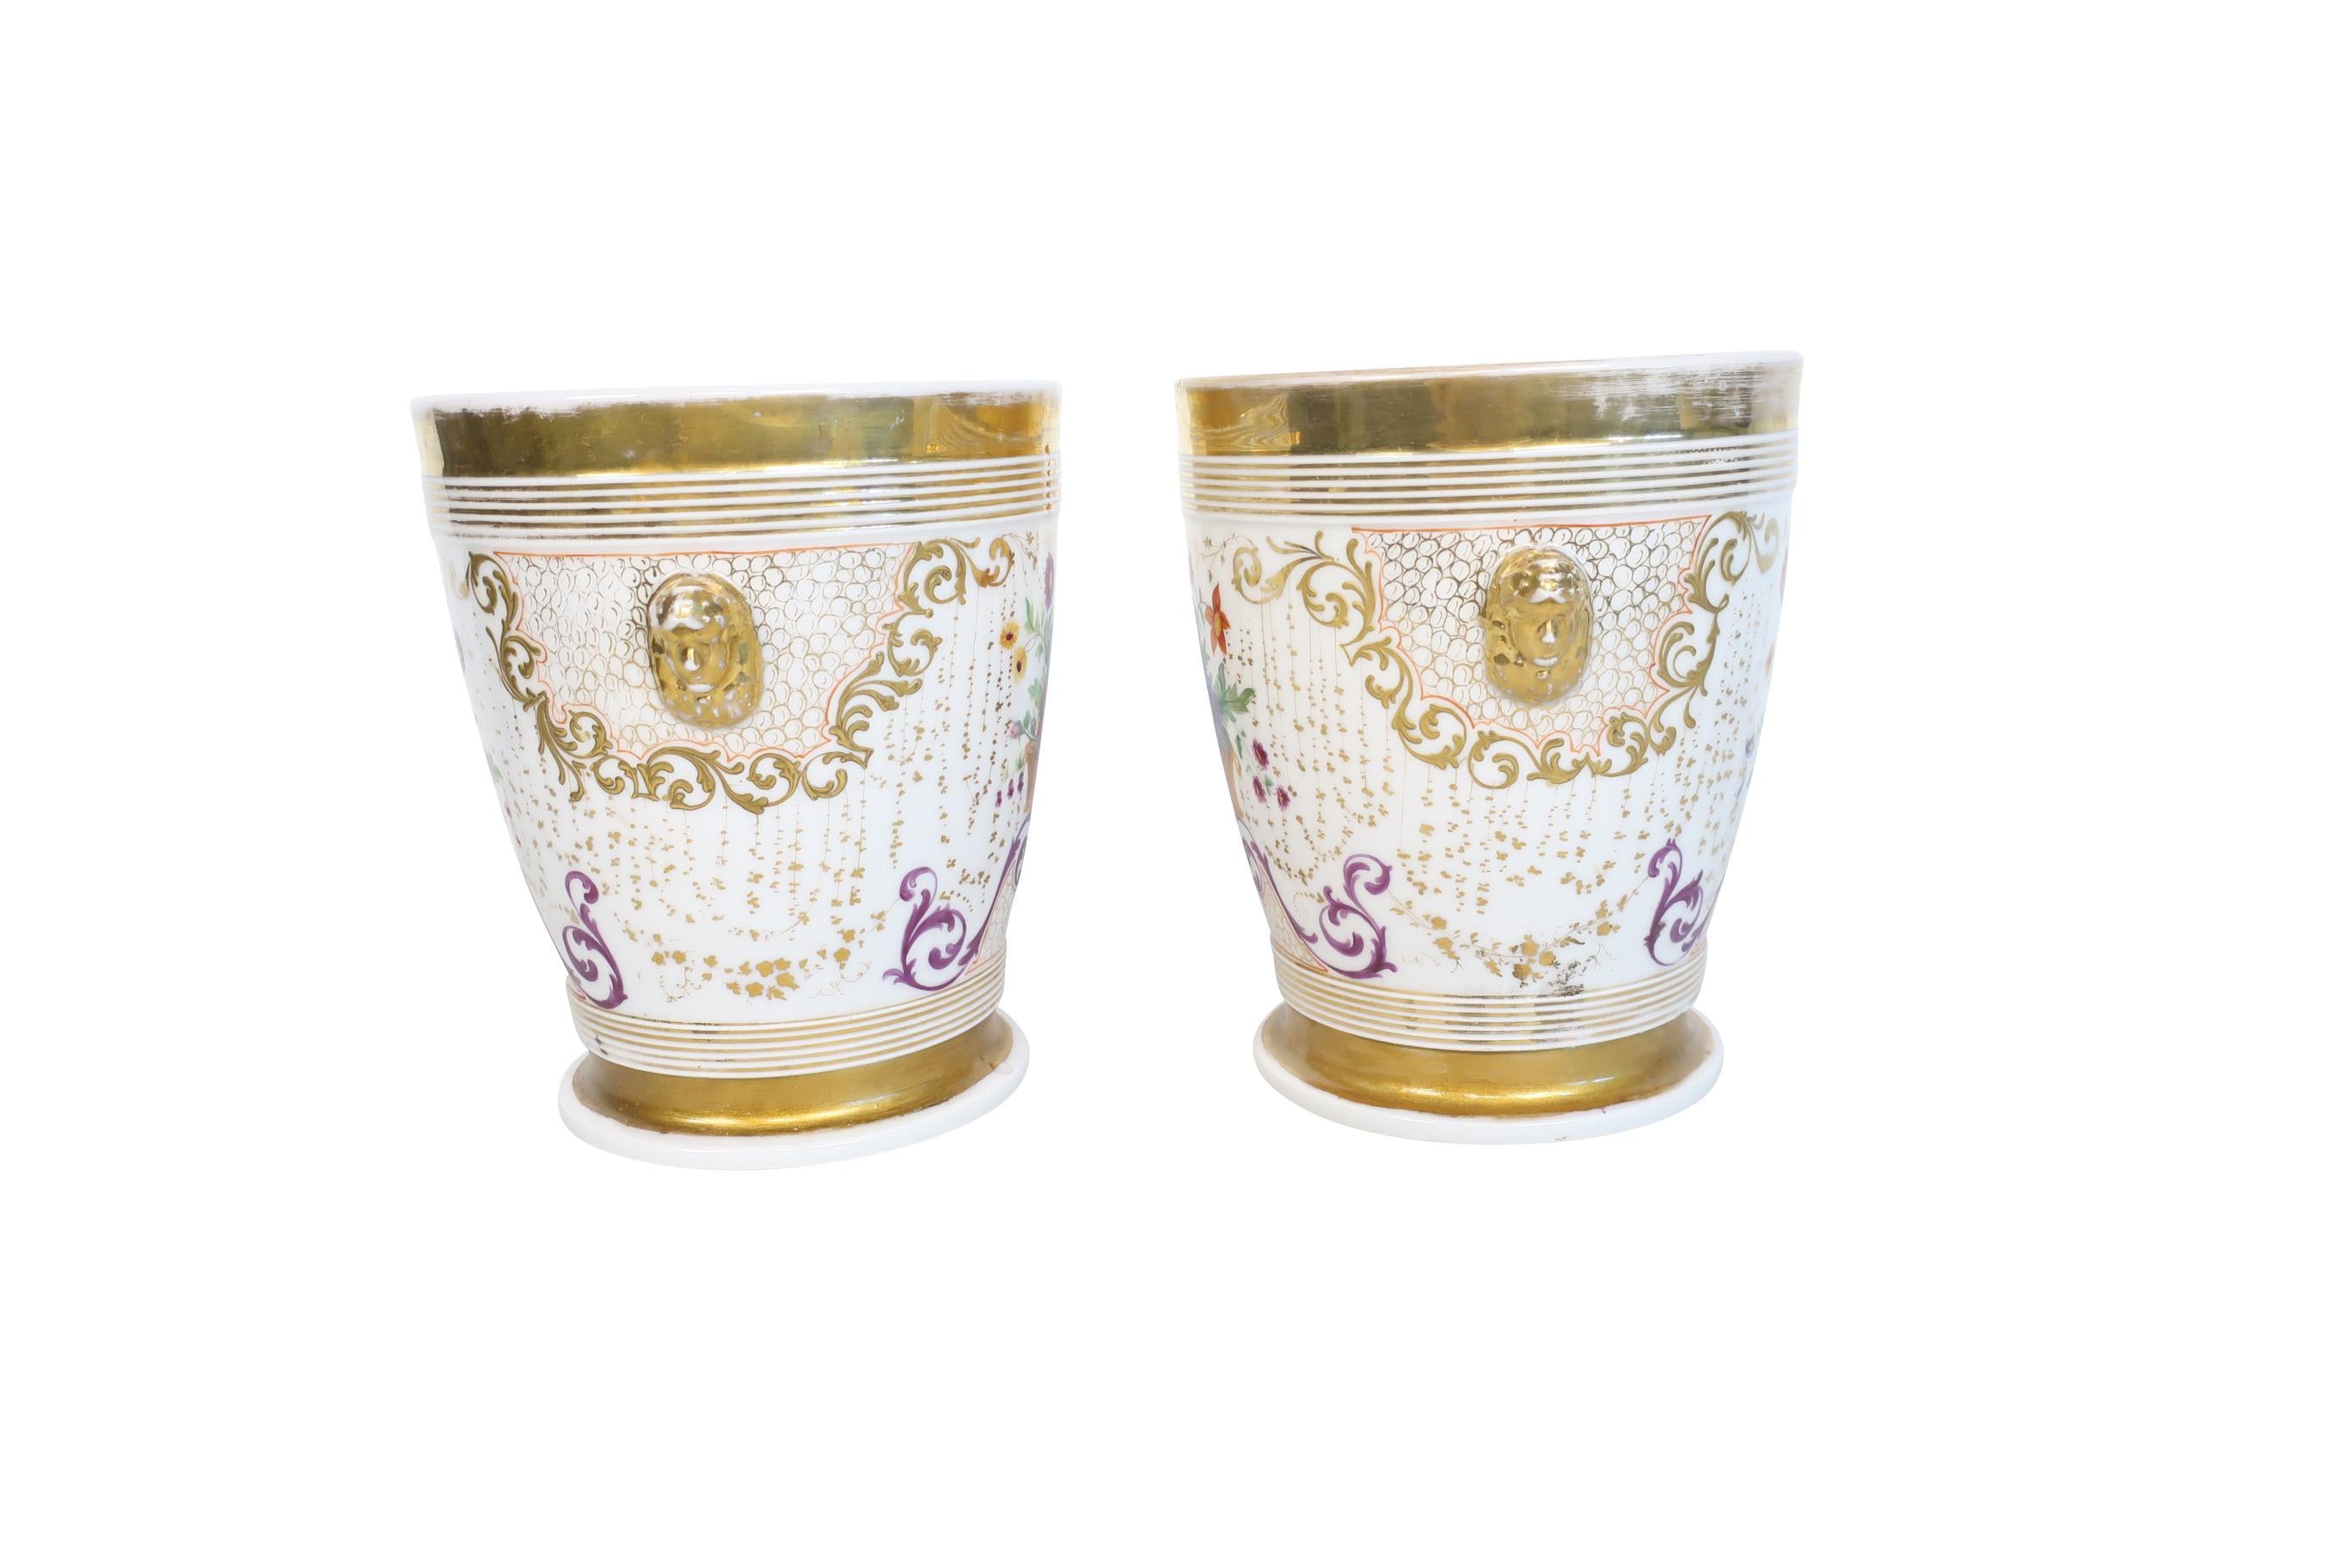 French 19th Century White and Floral Porcelain de Paris Jardiniere/Wine Coolers For Sale